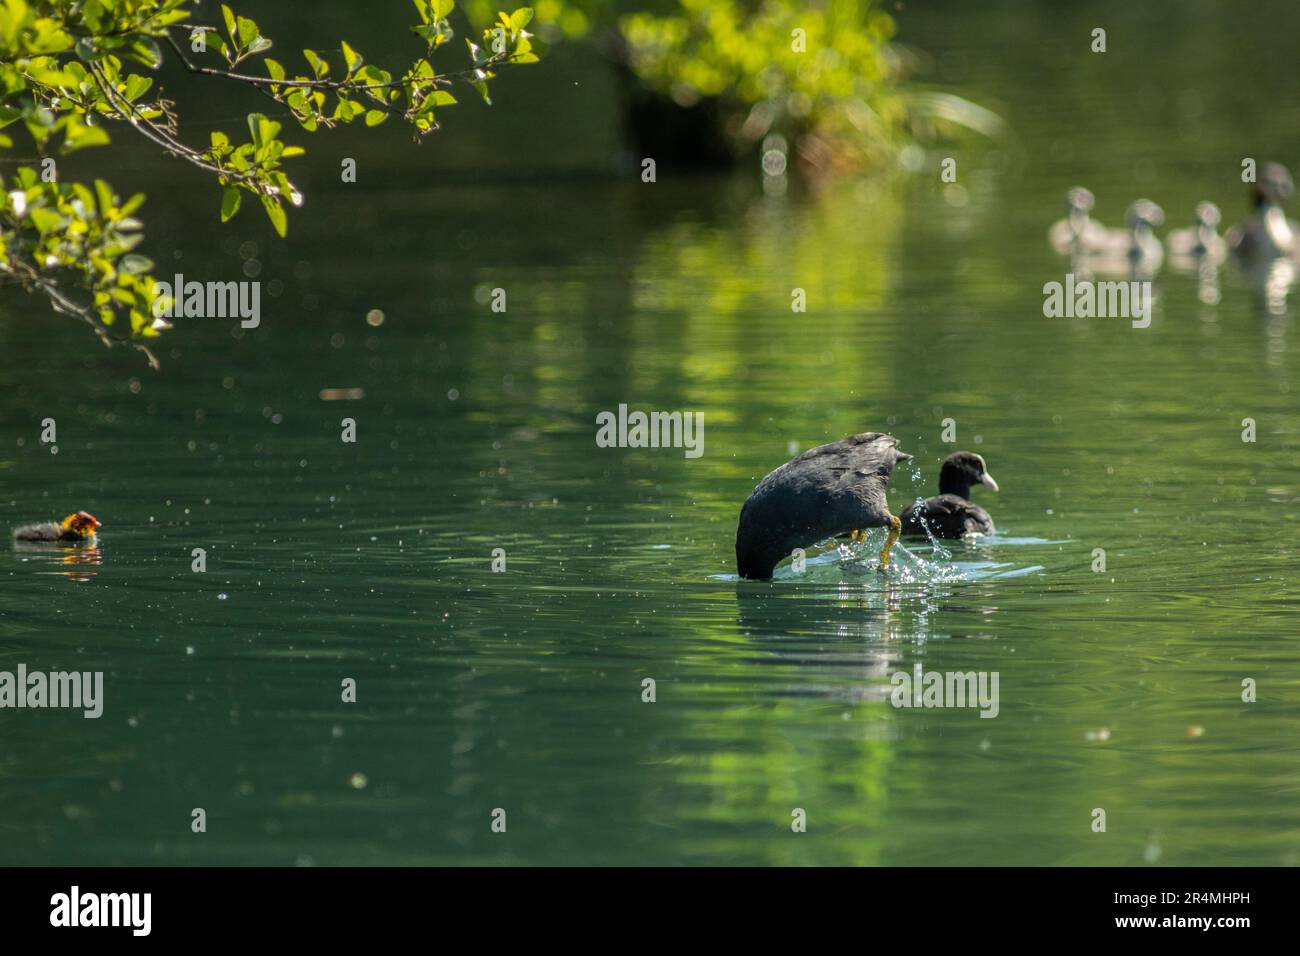 The Eurasian coot (Fulica atra), also known as the common coot, or Australian coot, is a member of the rail and crake bird family, the Rallidae. Stock Photo